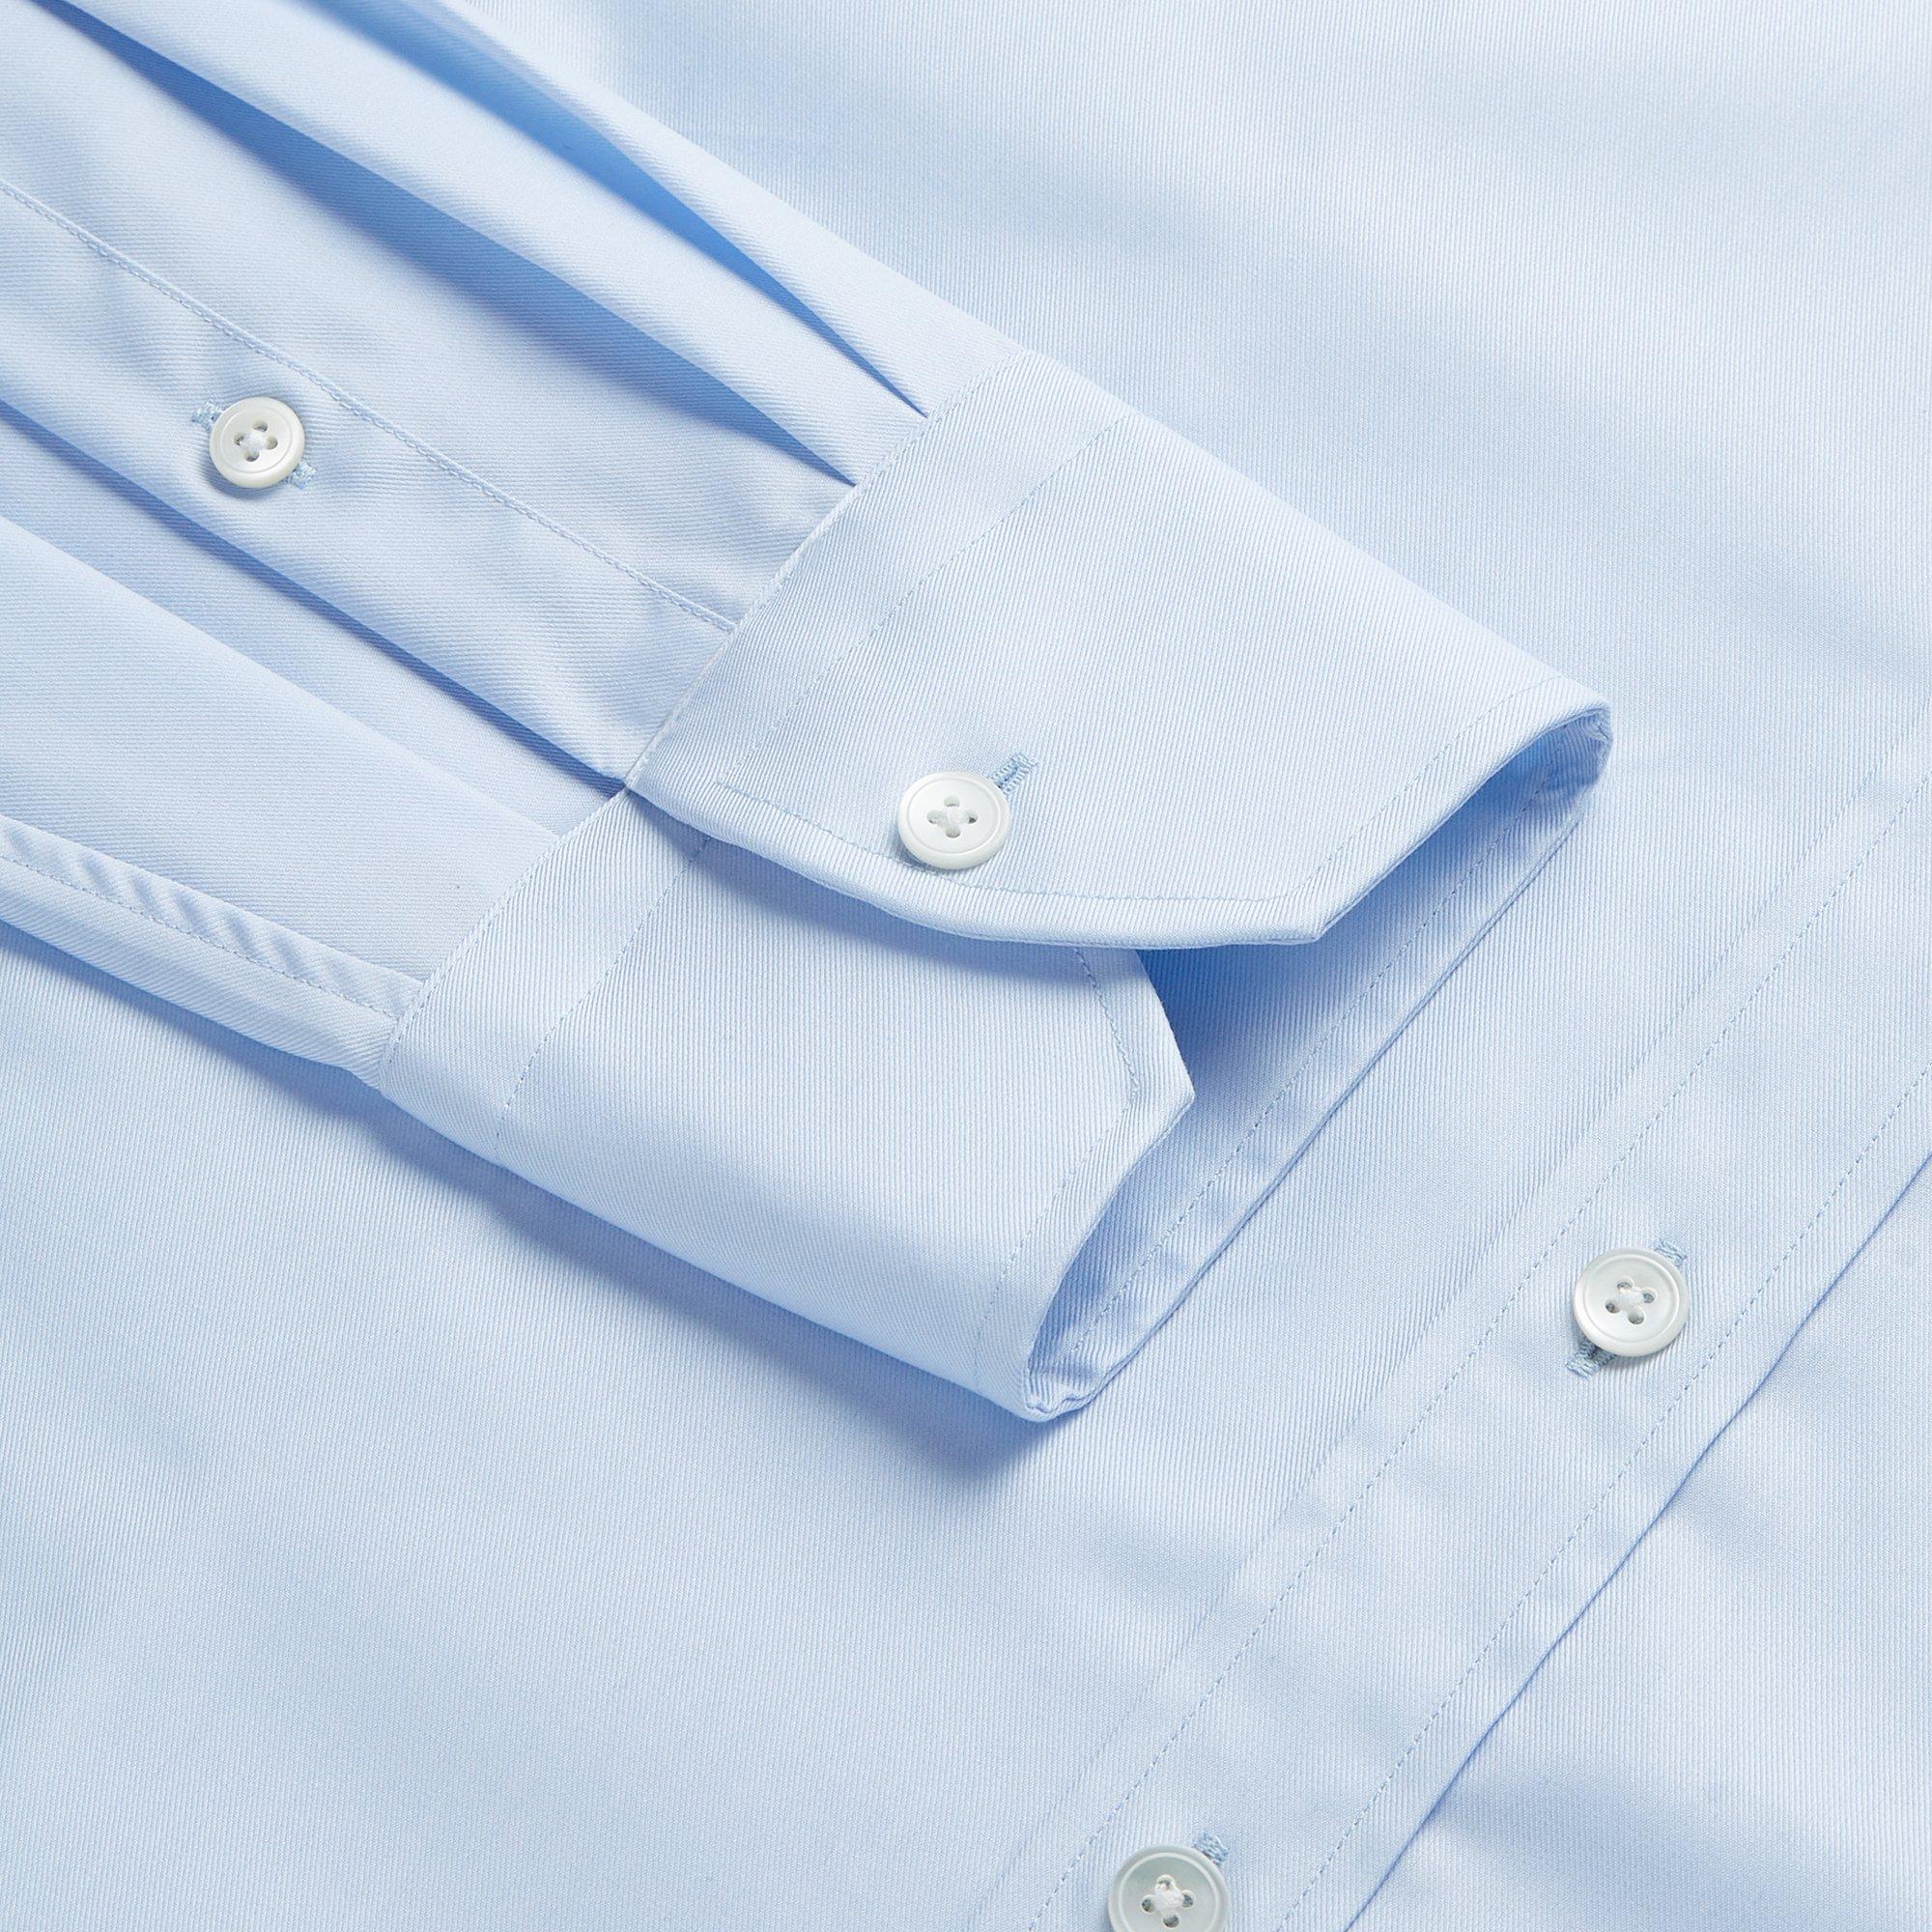 Thomas Pink releases the Resort Shirt collection - Brummell